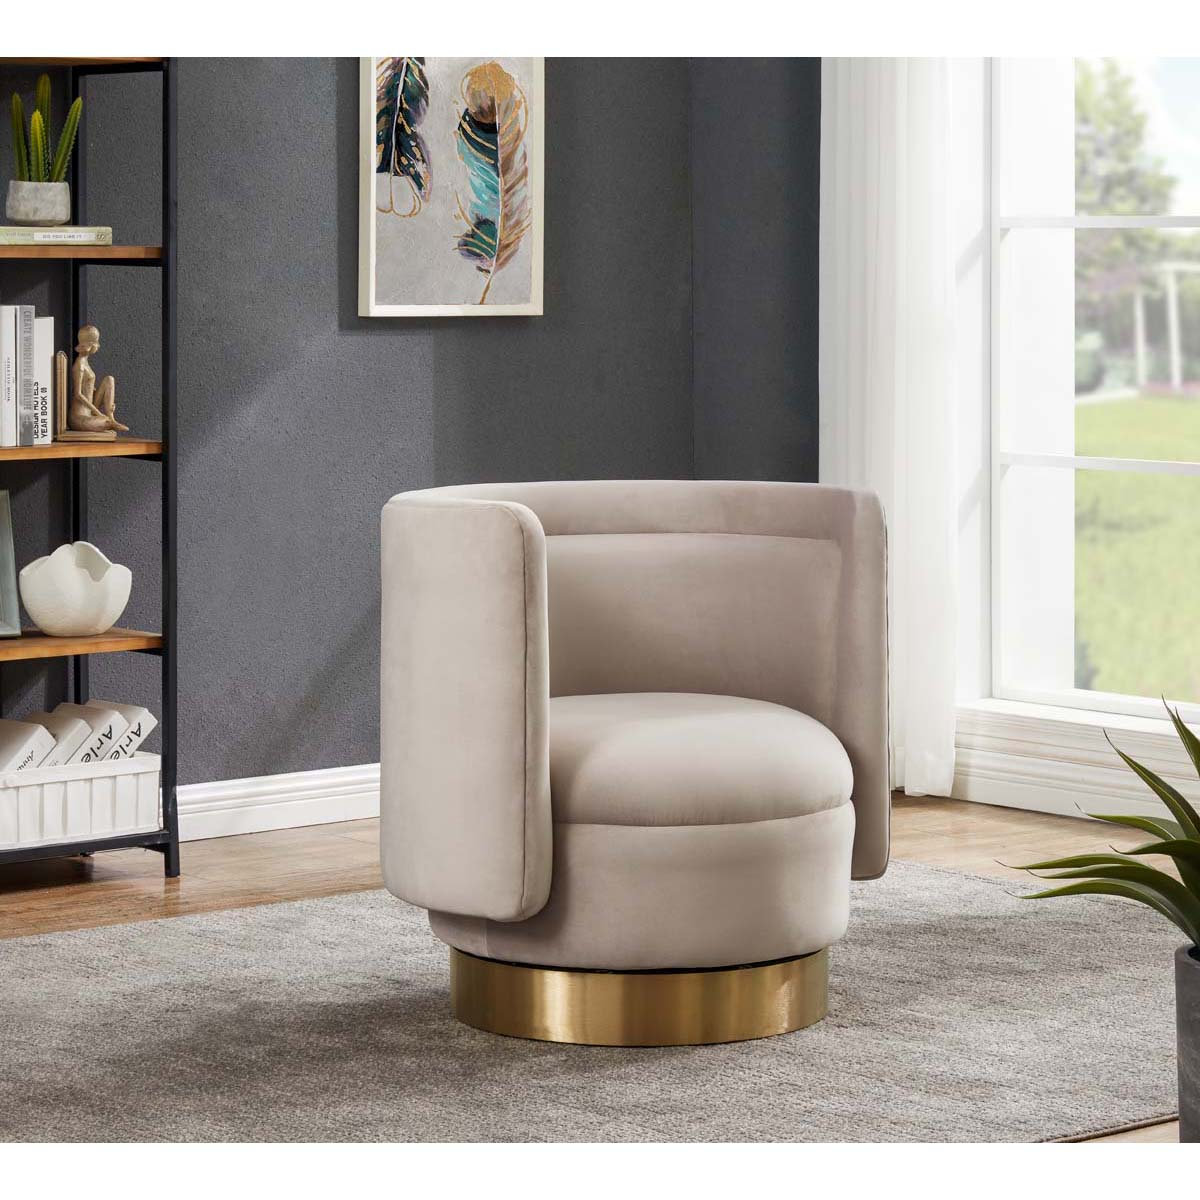 Safavieh Couture Brynlee Swivel Accent Chair - Pale Taupe / Gold